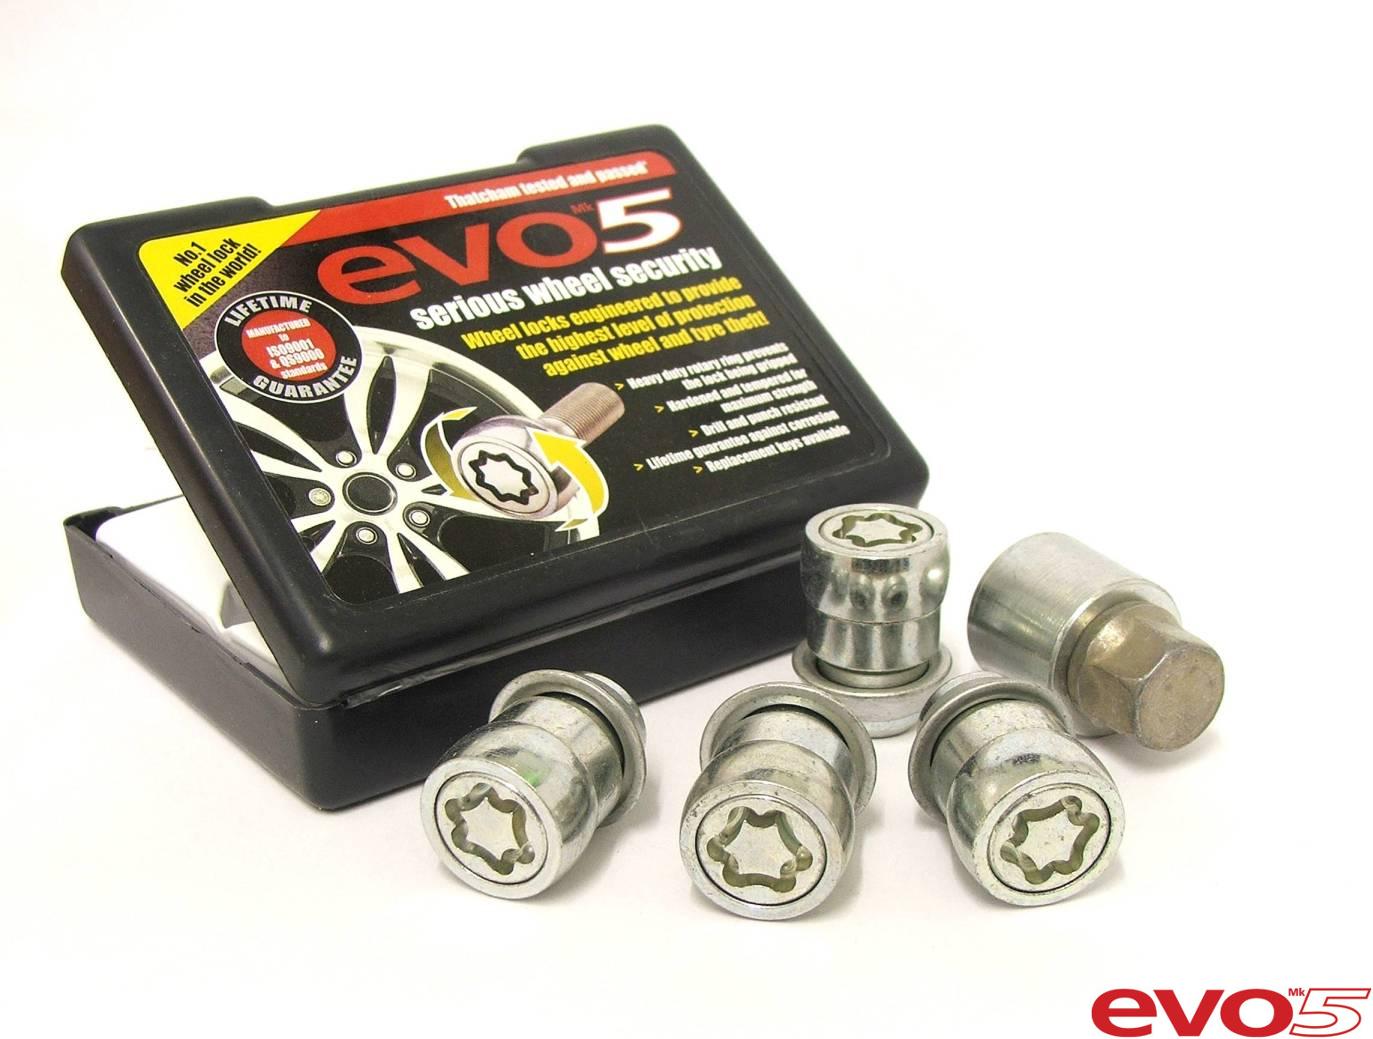 Set Of 4 Evo MK5 M12x1.50 Silver Locking Nuts For Alloy and Steel Wheels B1-270/5